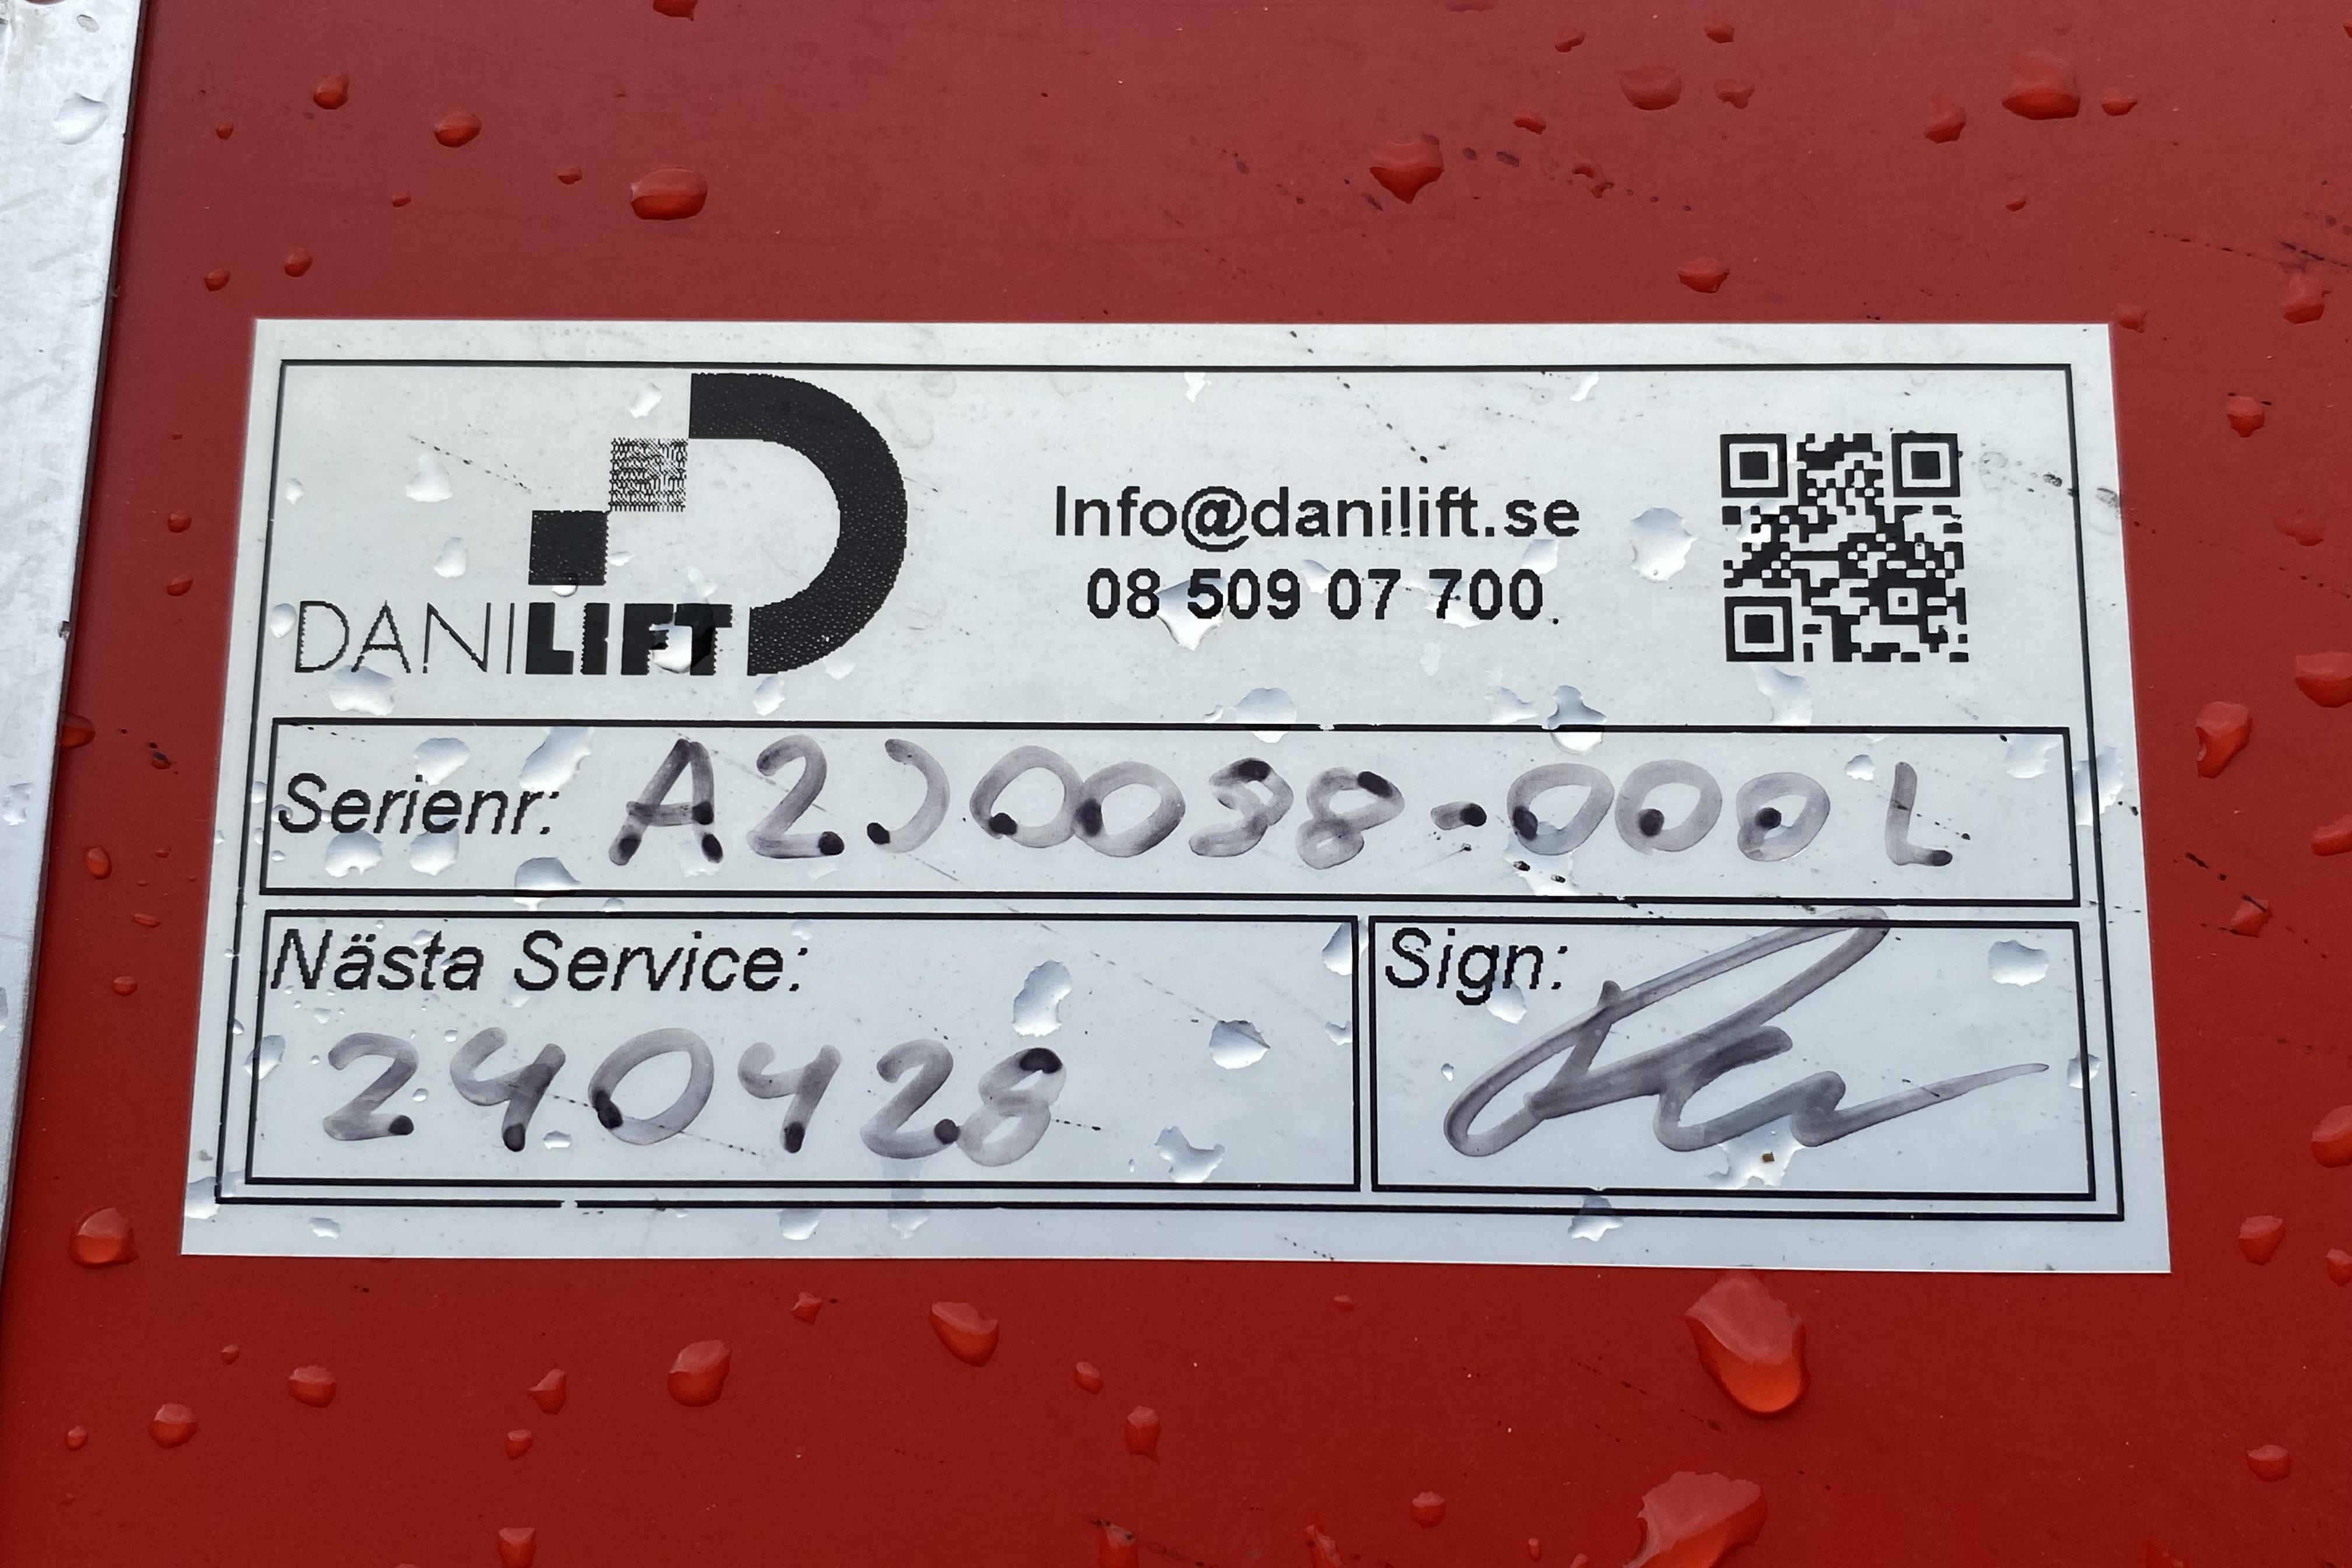 Scania P380 - 123 511 km - Automatic - red - 2006